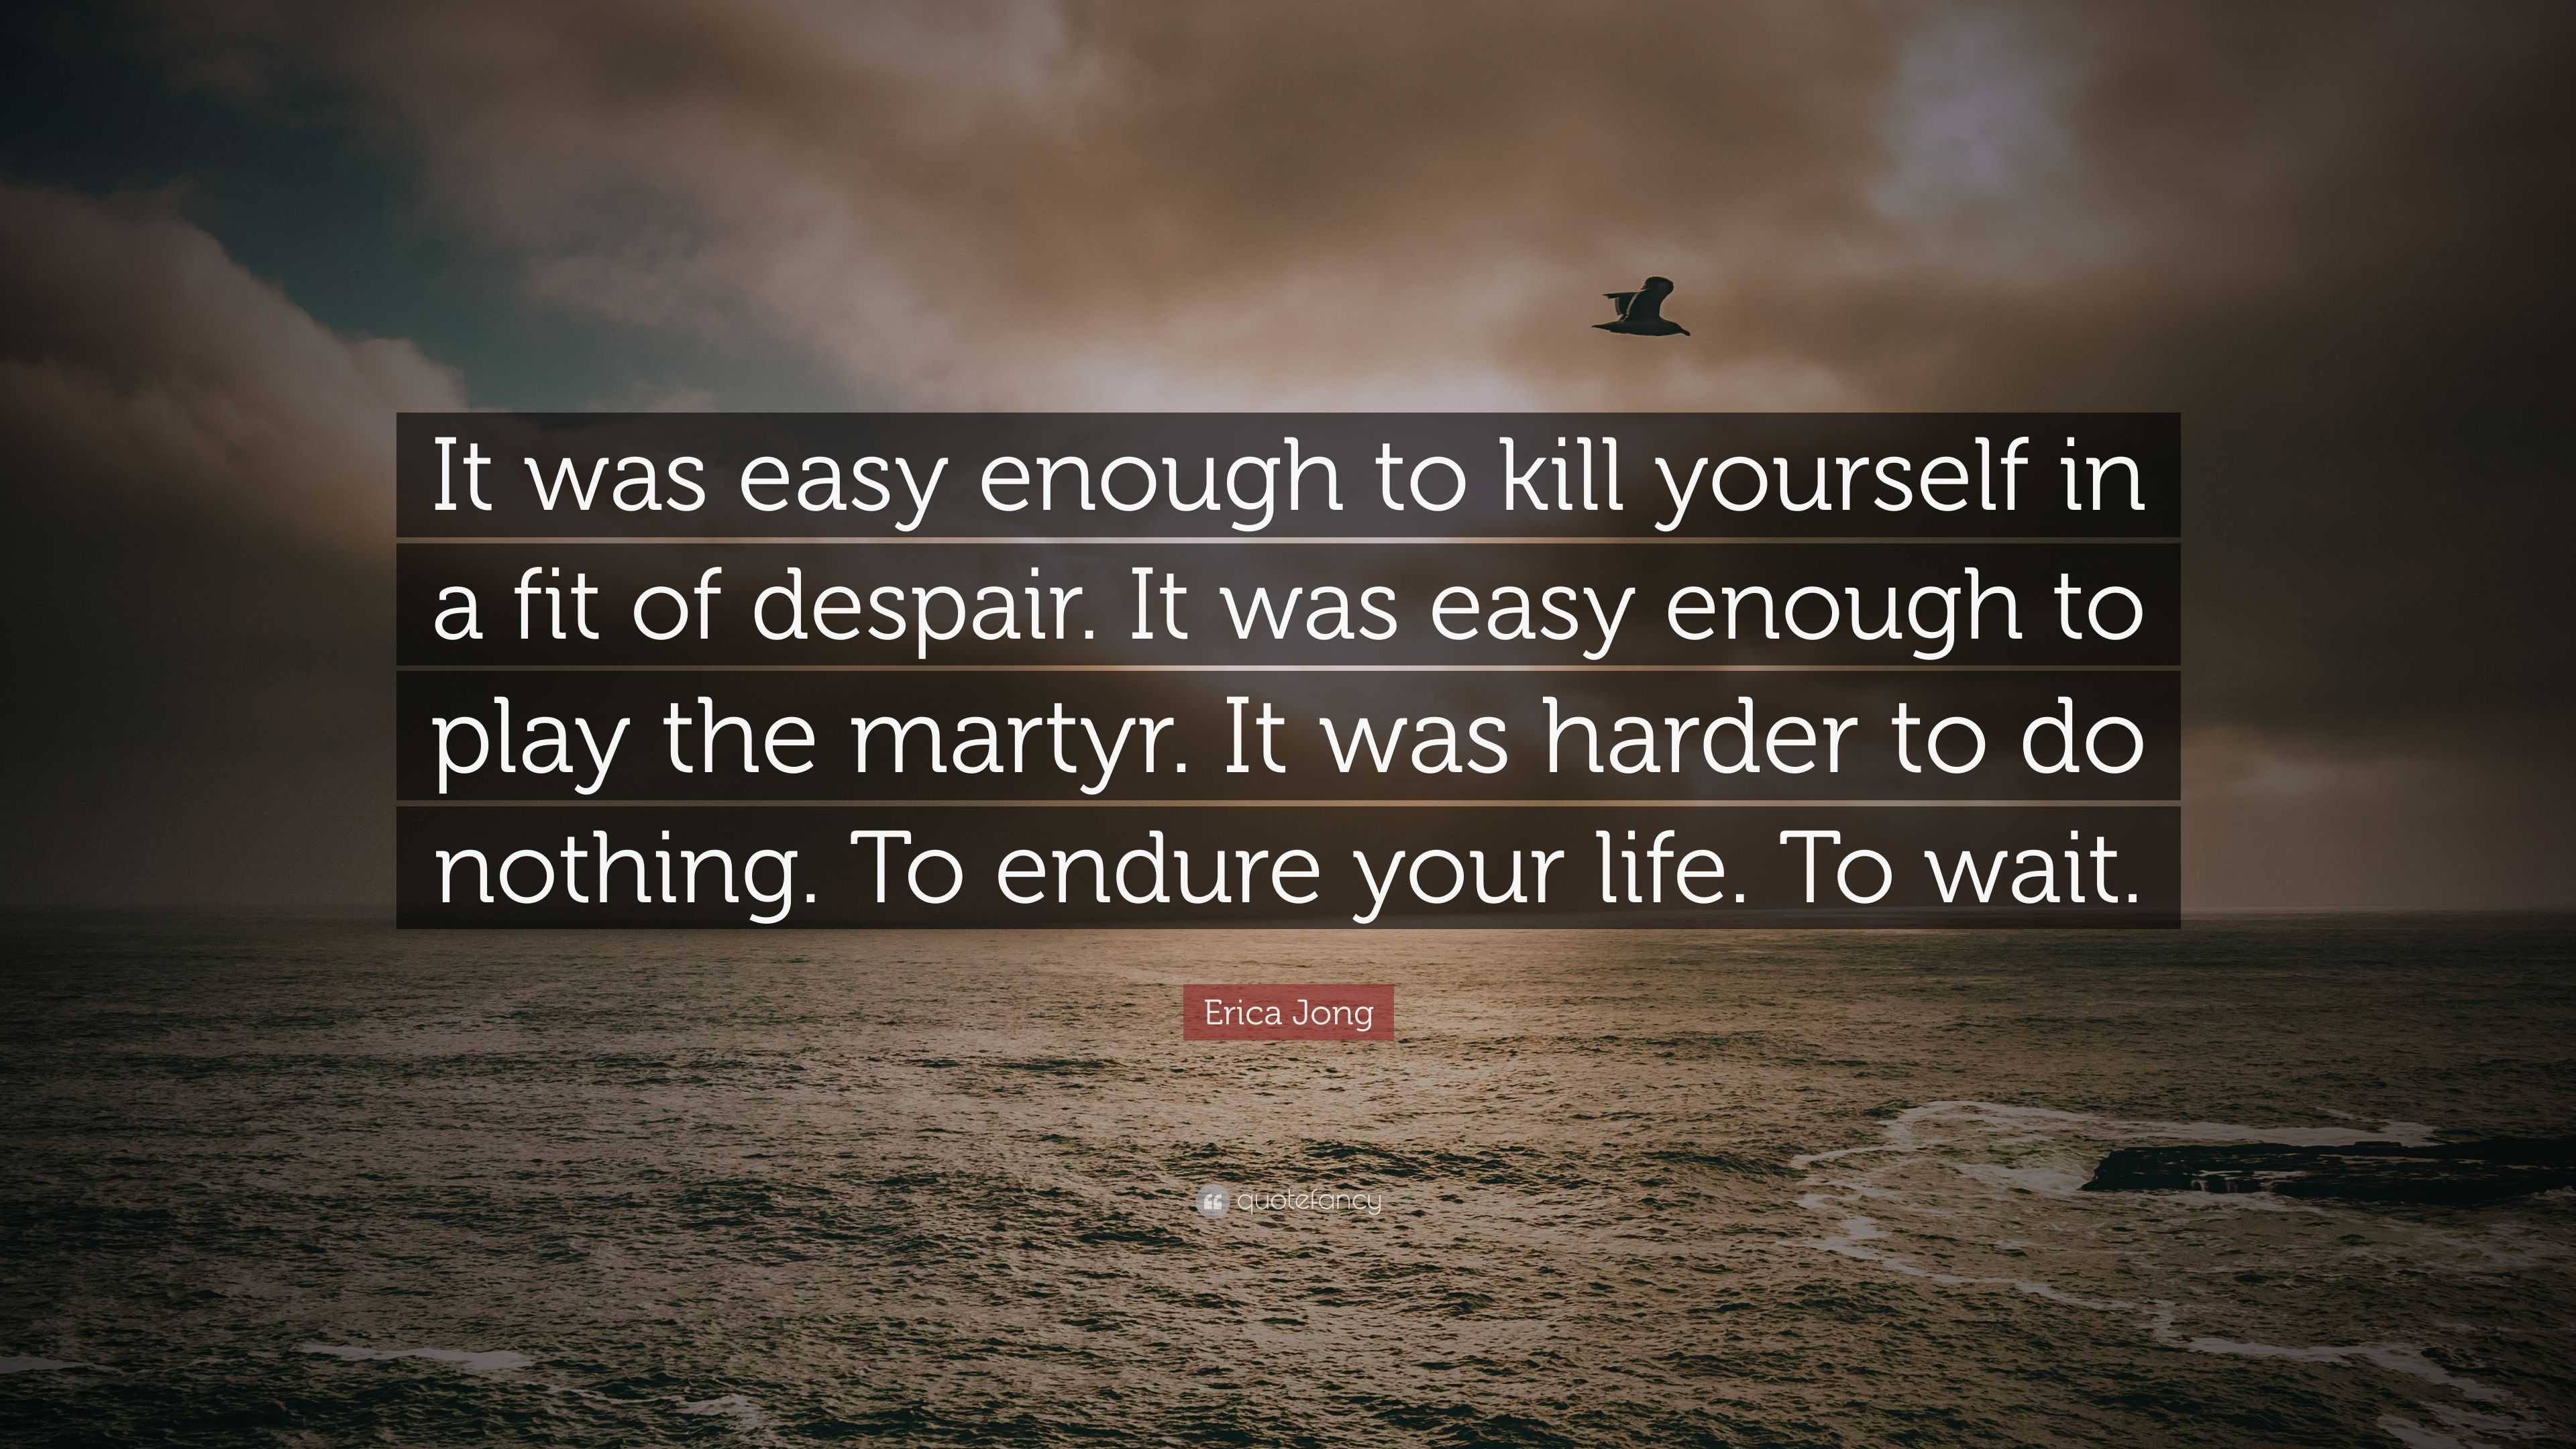 Erica Jong Quote: “It was easy enough to kill yourself in a fit of ...